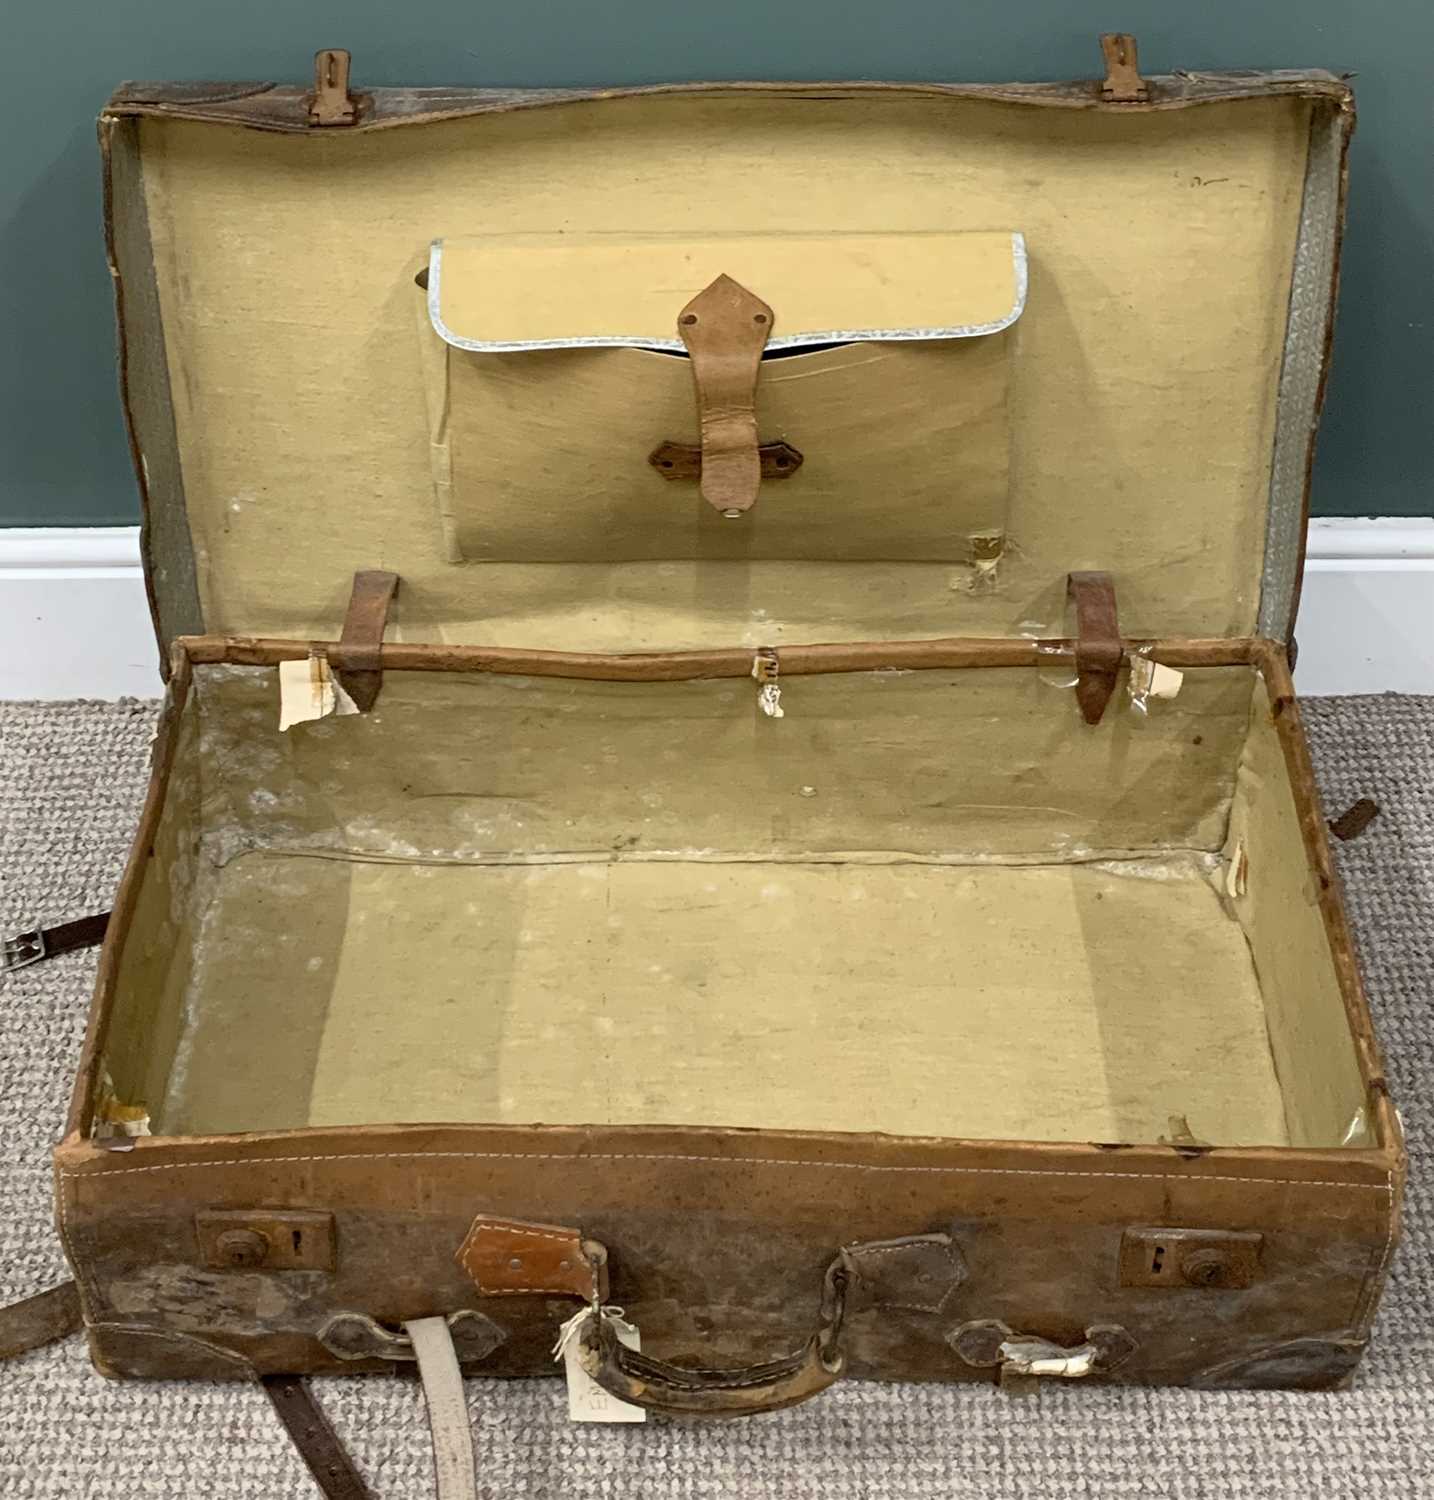 THREE ITEMS OF VINTAGE LUGGAGE & A SHEEPSKIN TYPE WOOLLEN RUG, trunks, 32cms (h), 69cms (w), 43.5cms - Image 9 of 9